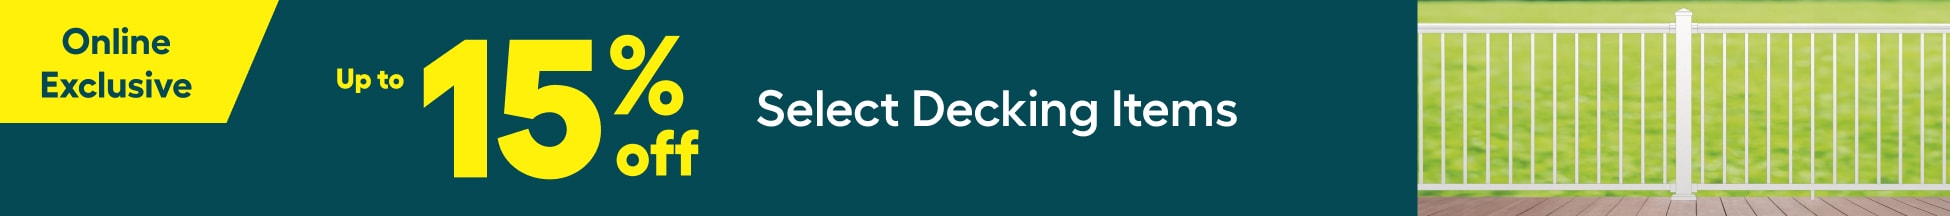 Decking items